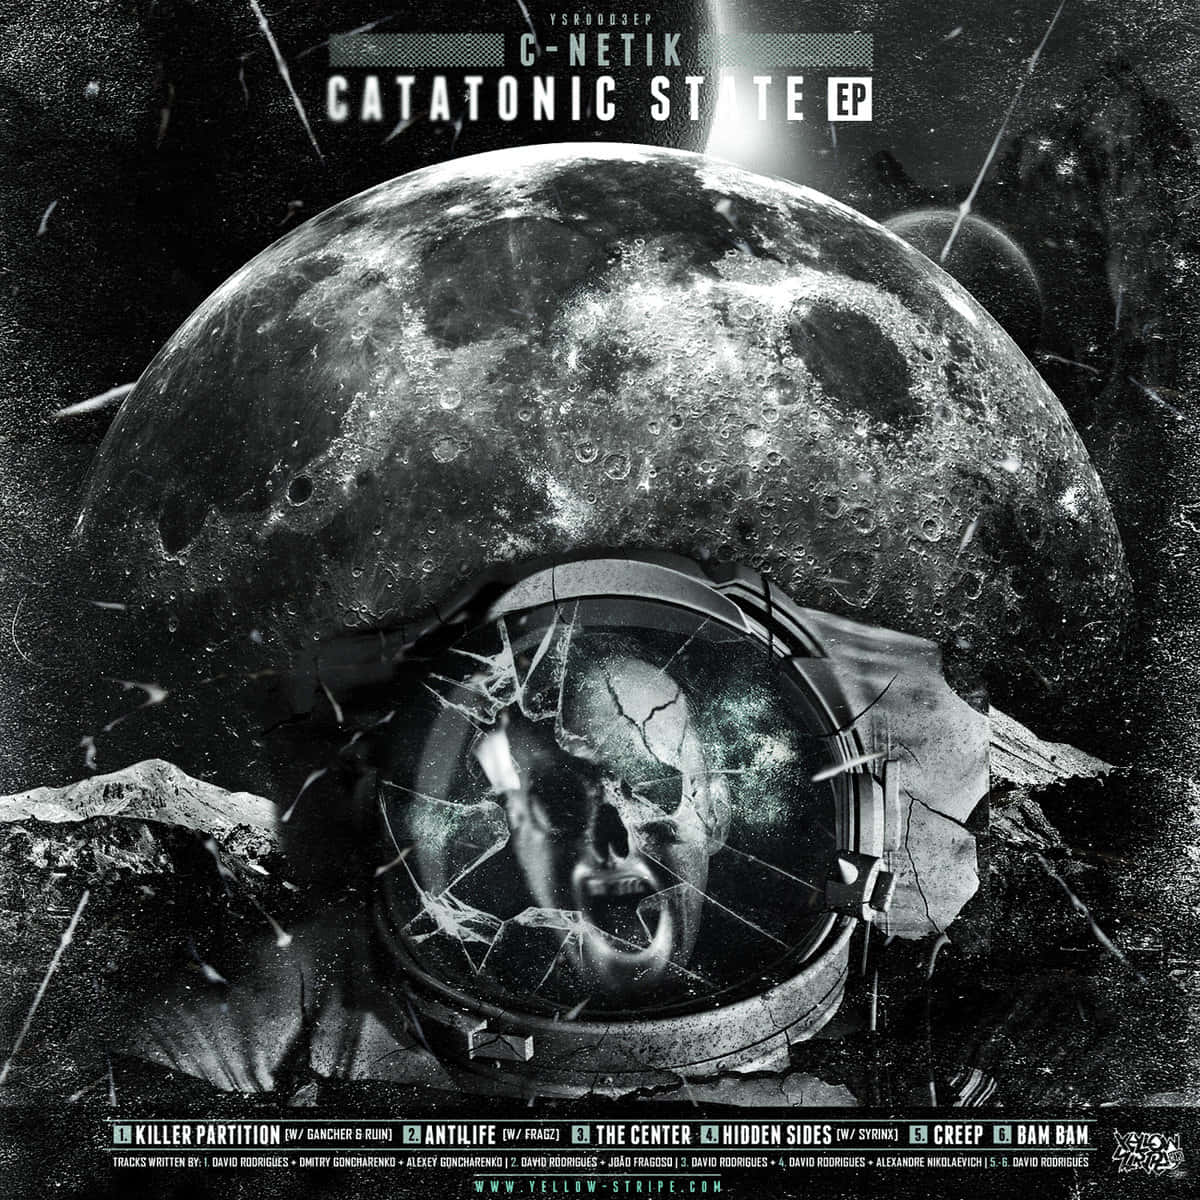 Catatonic State Ep Album Cover By C-netik